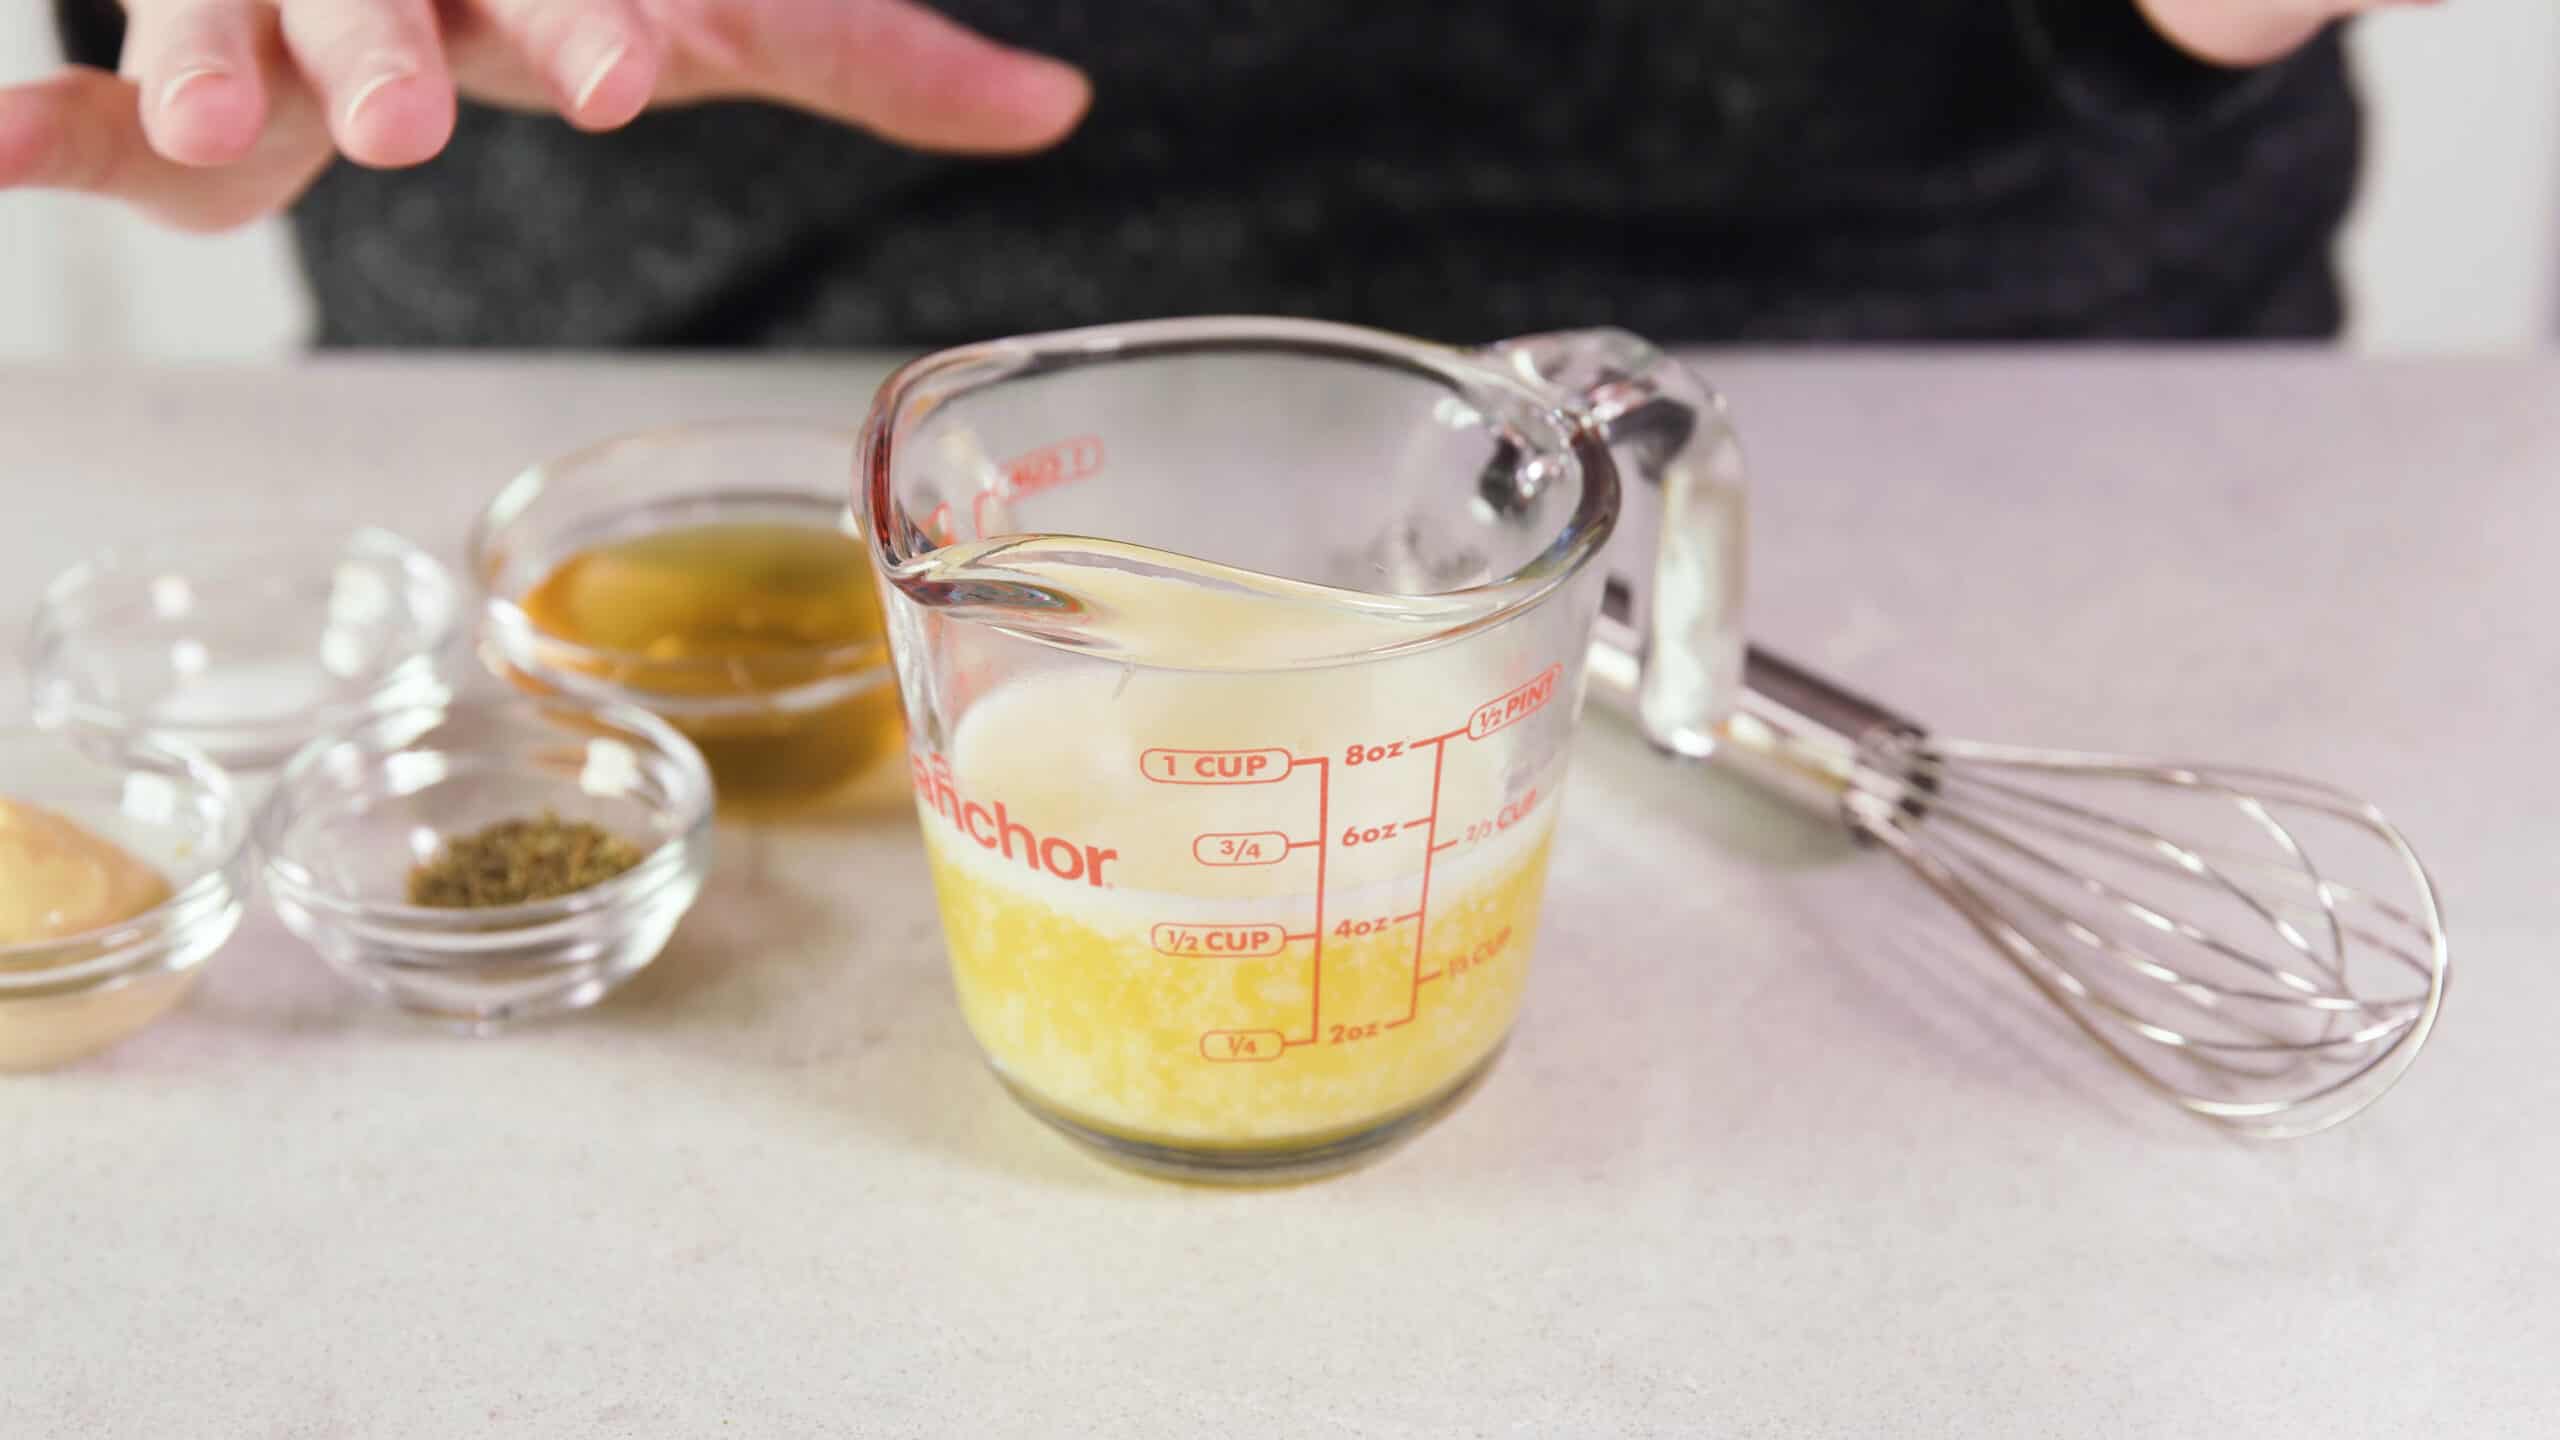 Angled view of clear glass measuring cup filled with melted butter and other wet and dry ingredients in smaller clear glass mixing bowls to the left and a wire whisk to the right.